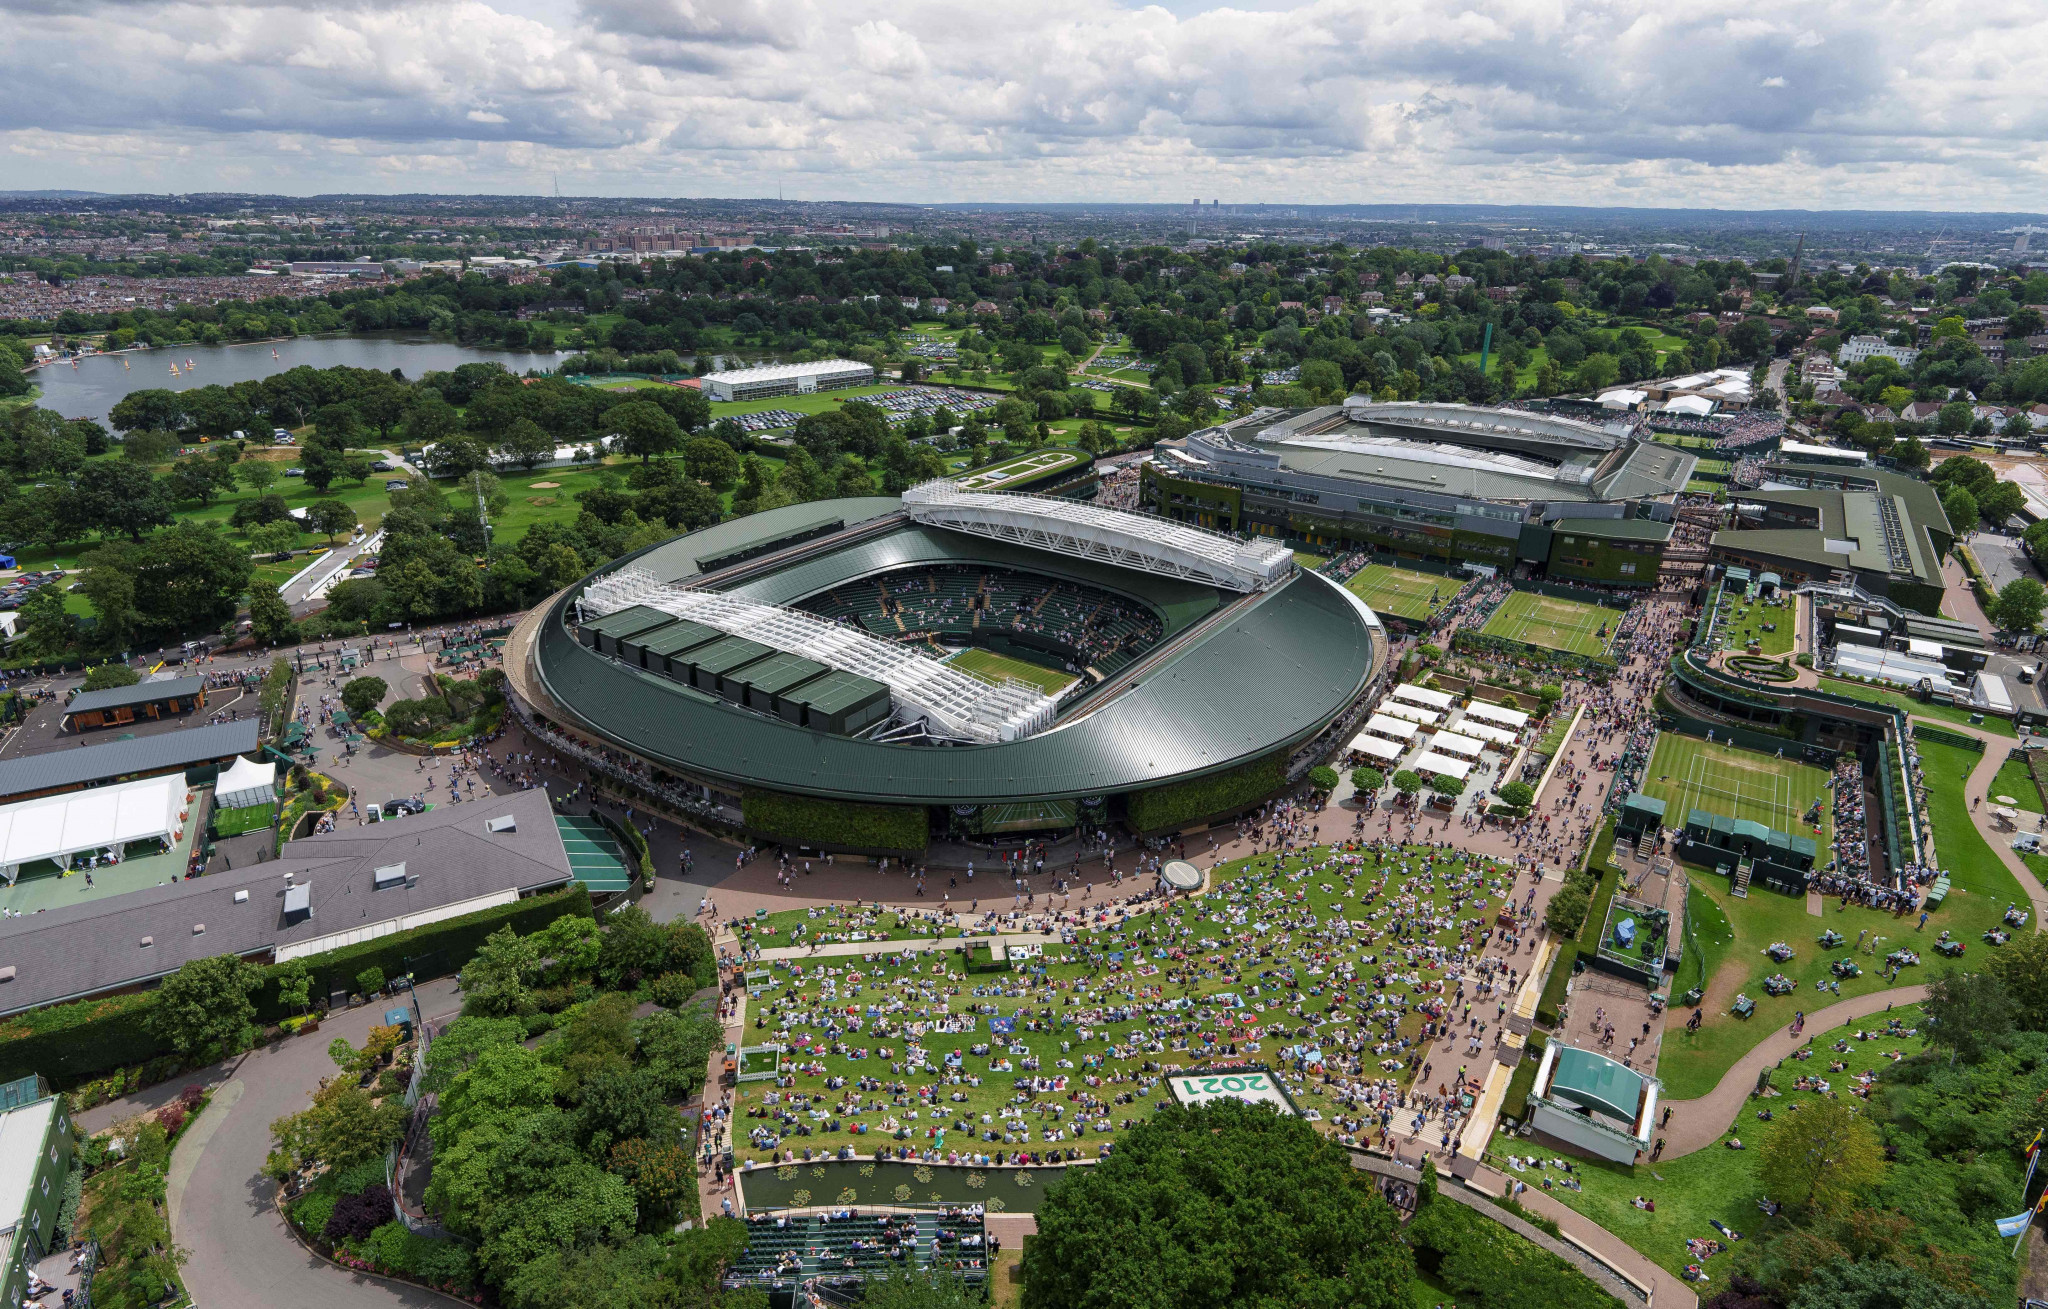 ATP to take action against Wimbledon over ban on Russian and Belarusian players